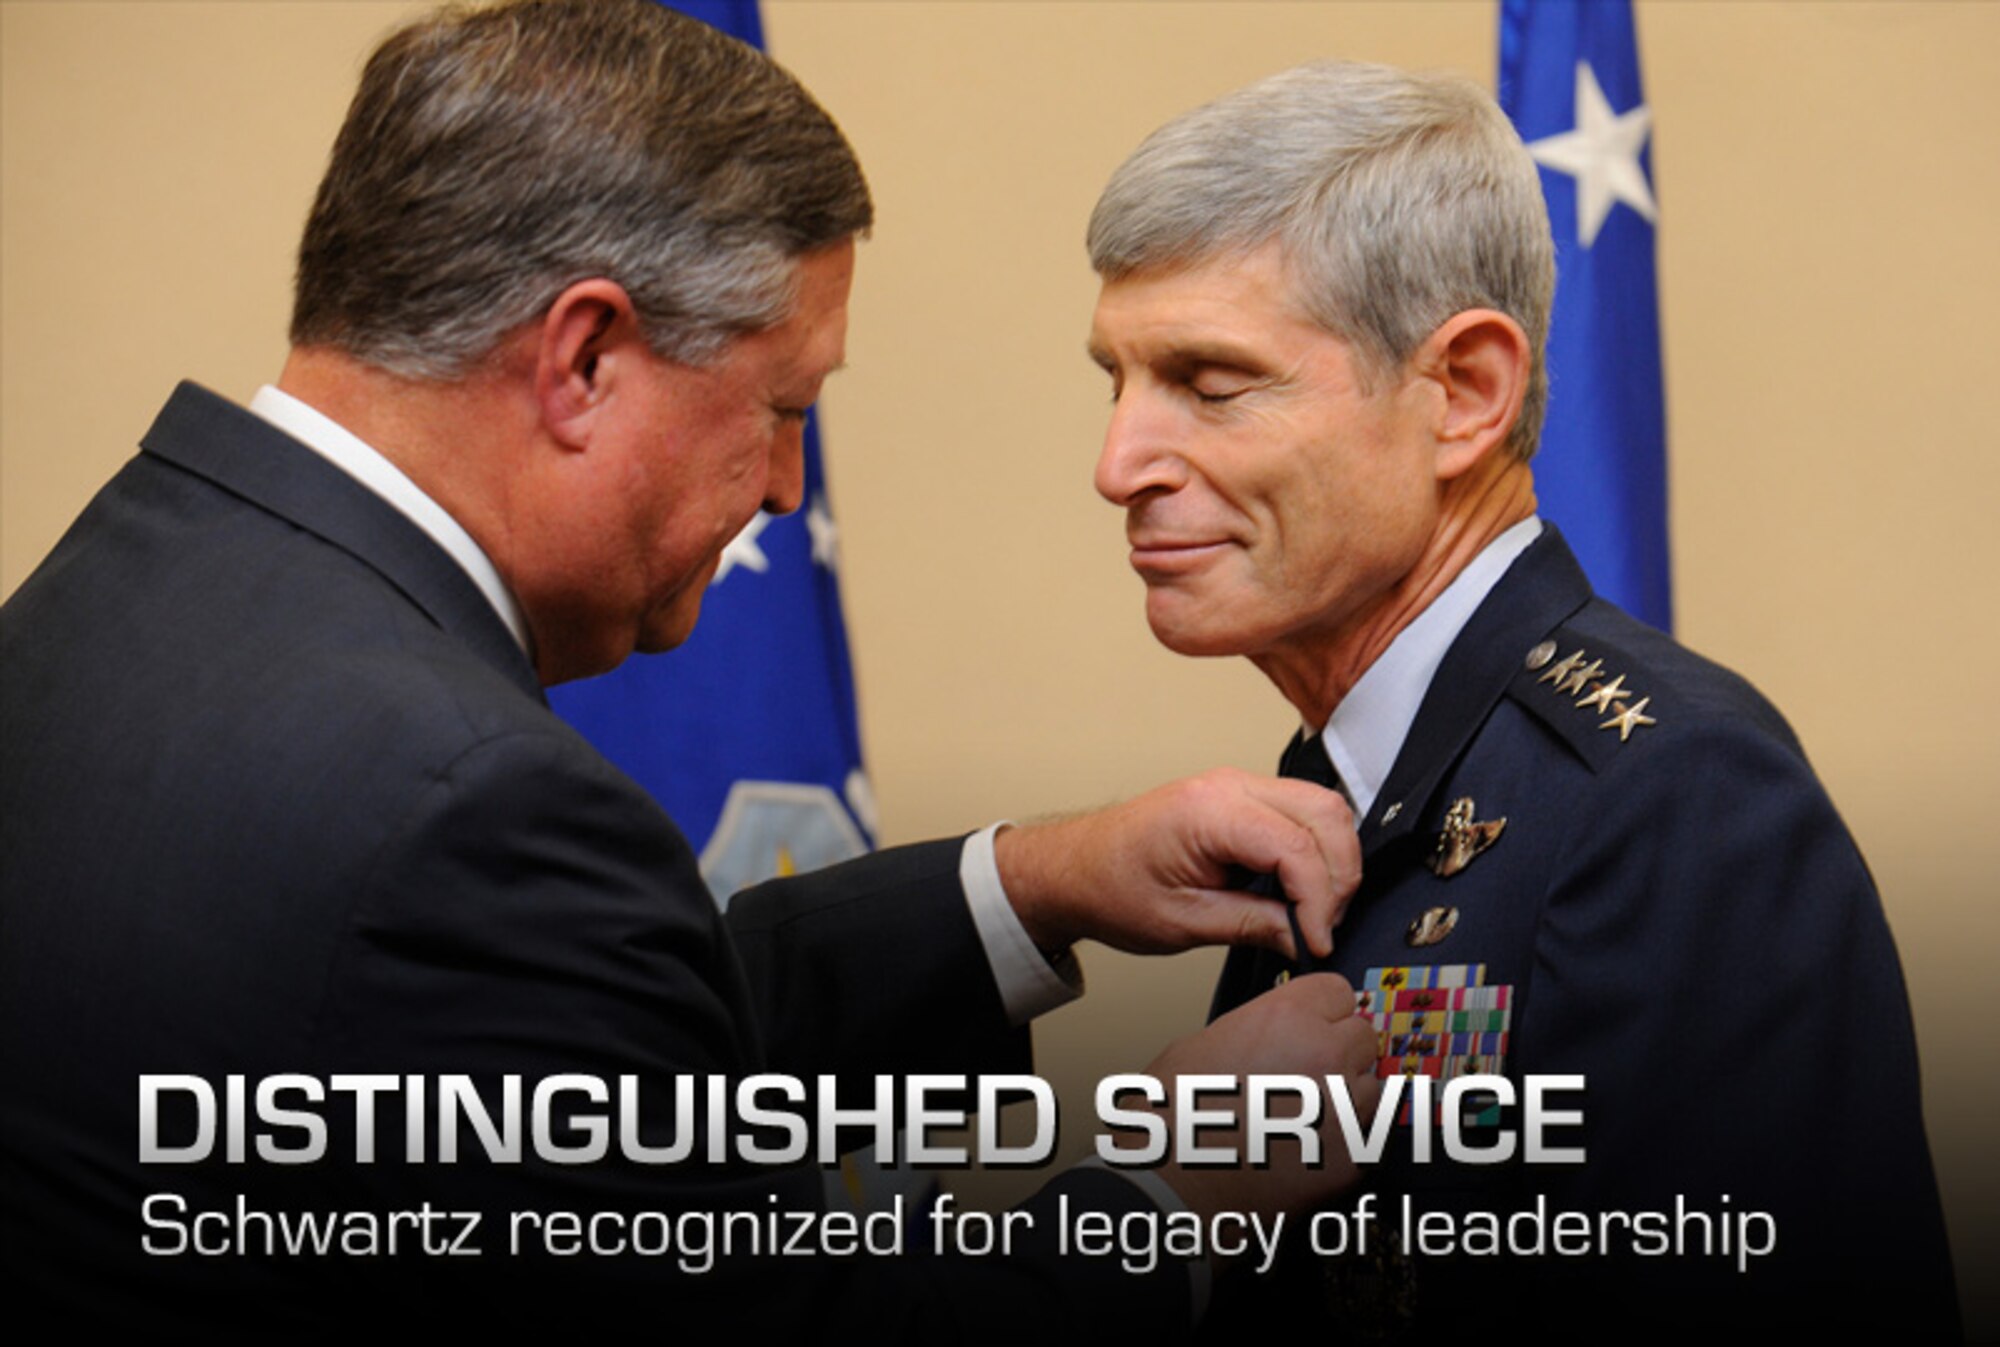 Secretary of the Air Force Michael Donley presents the Distinguished Service Medal to Air Force Chief of Staff Gen. Norton Schwartz in a ceremony at Joint Base Andrews, Md., on Aug. 9, 2012.  (U.S. Air Force photo/Scott M. Ash)